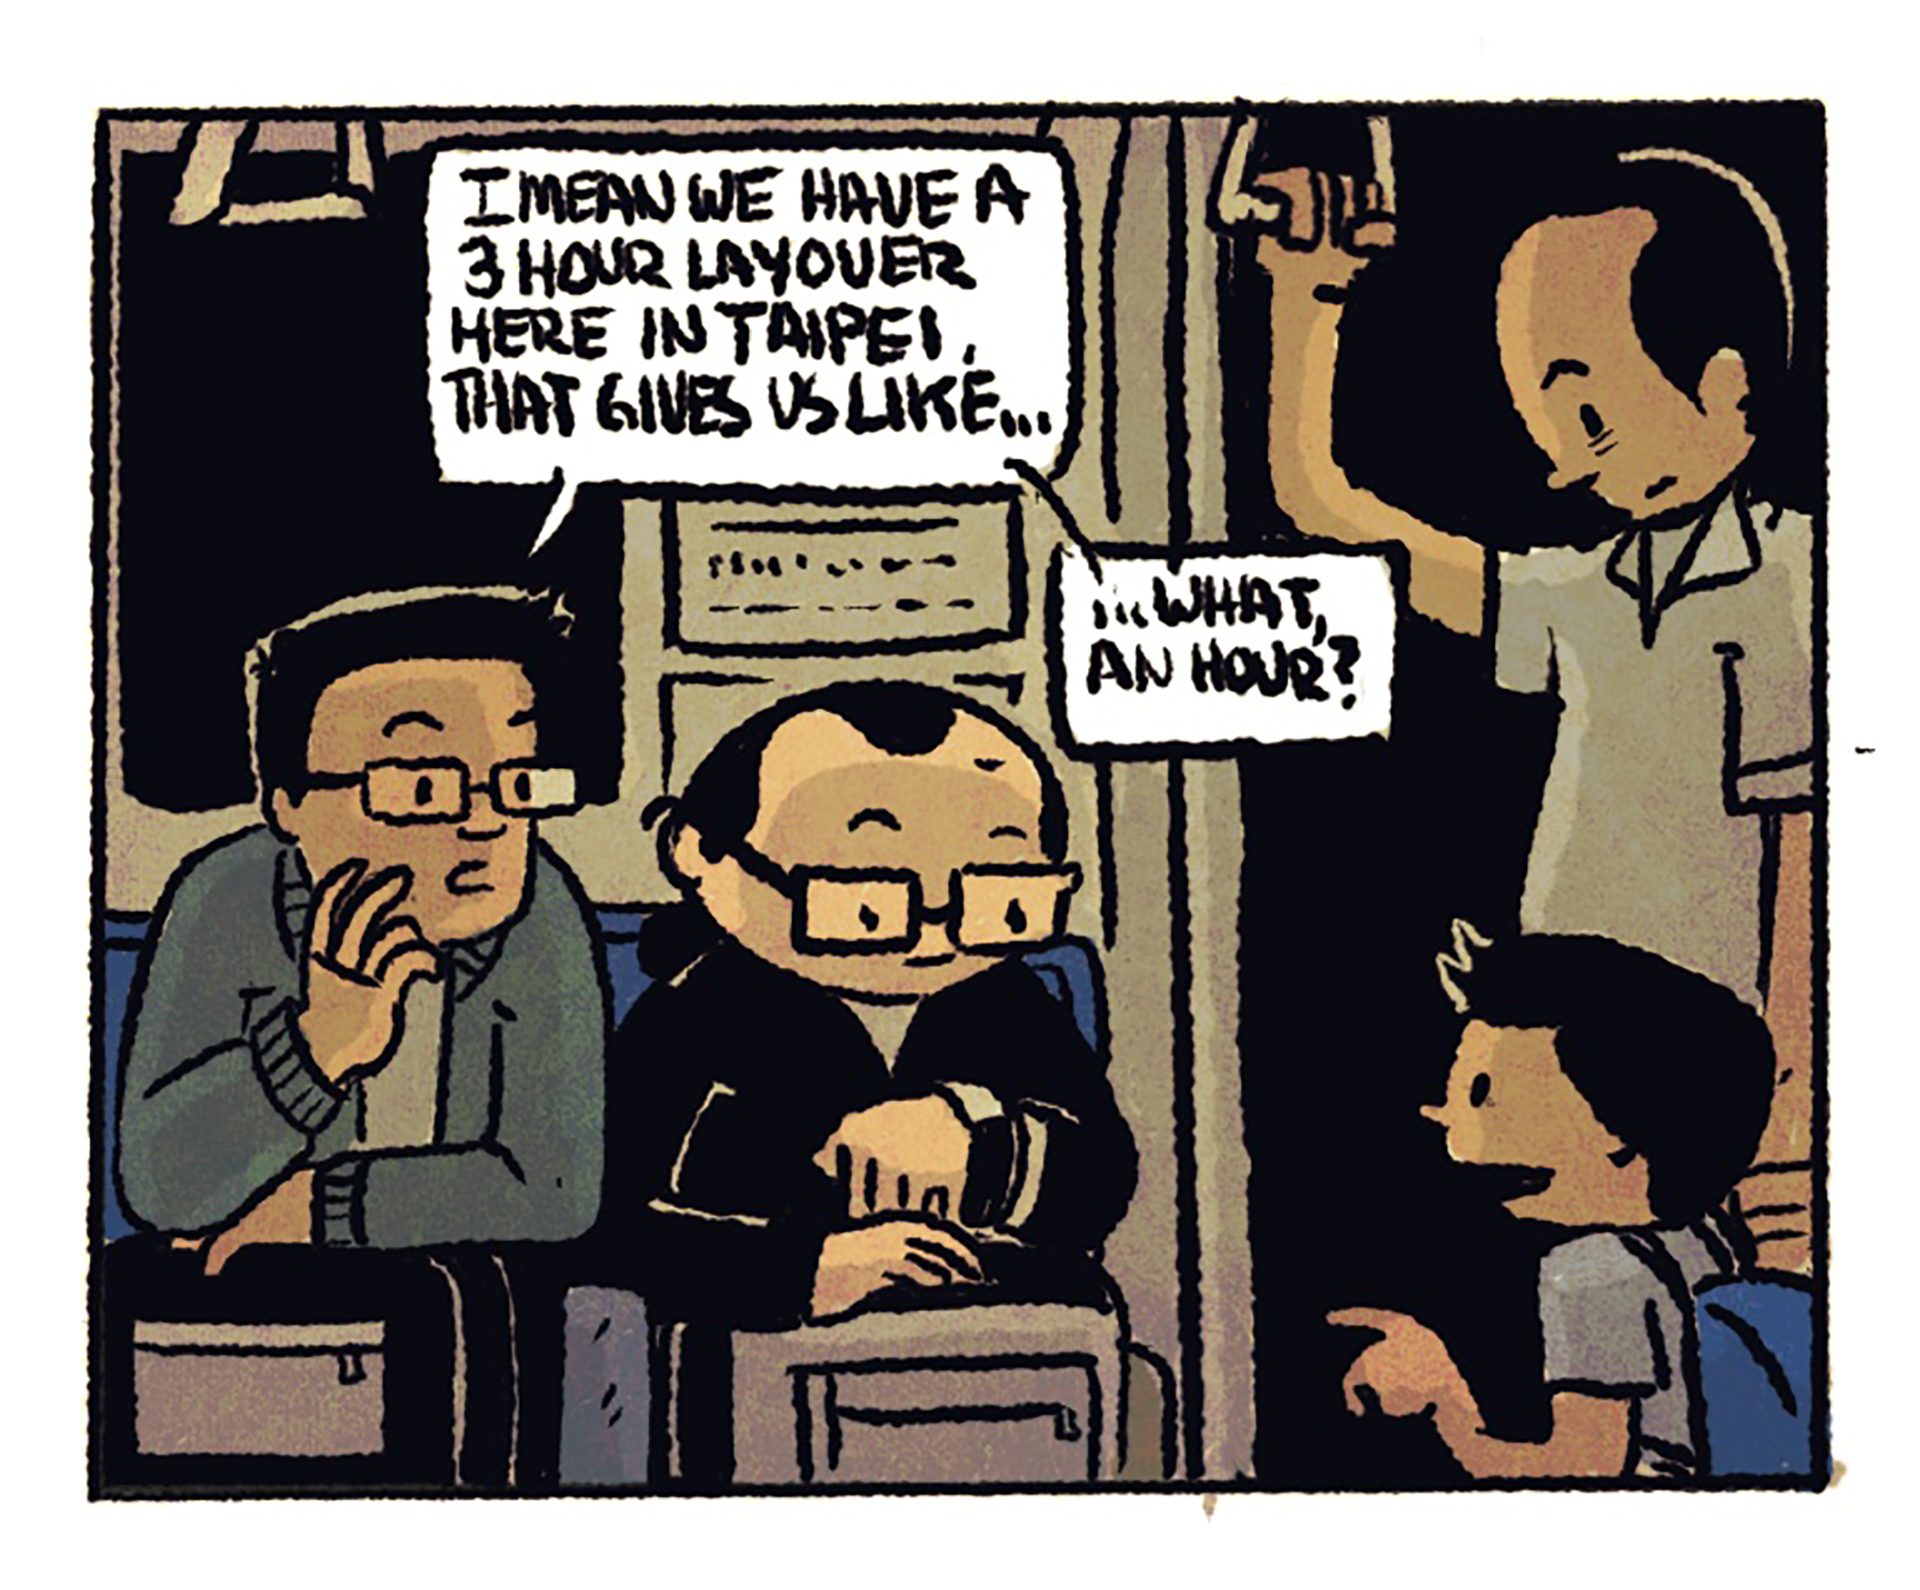 The two protagonists are seated in a train car; one of them checks his watch. 1st speech bubble: "I mean we have a 3 hour layover here in Taipei. That gives us like..." 2nd speech bubble: "...what, an hour?"